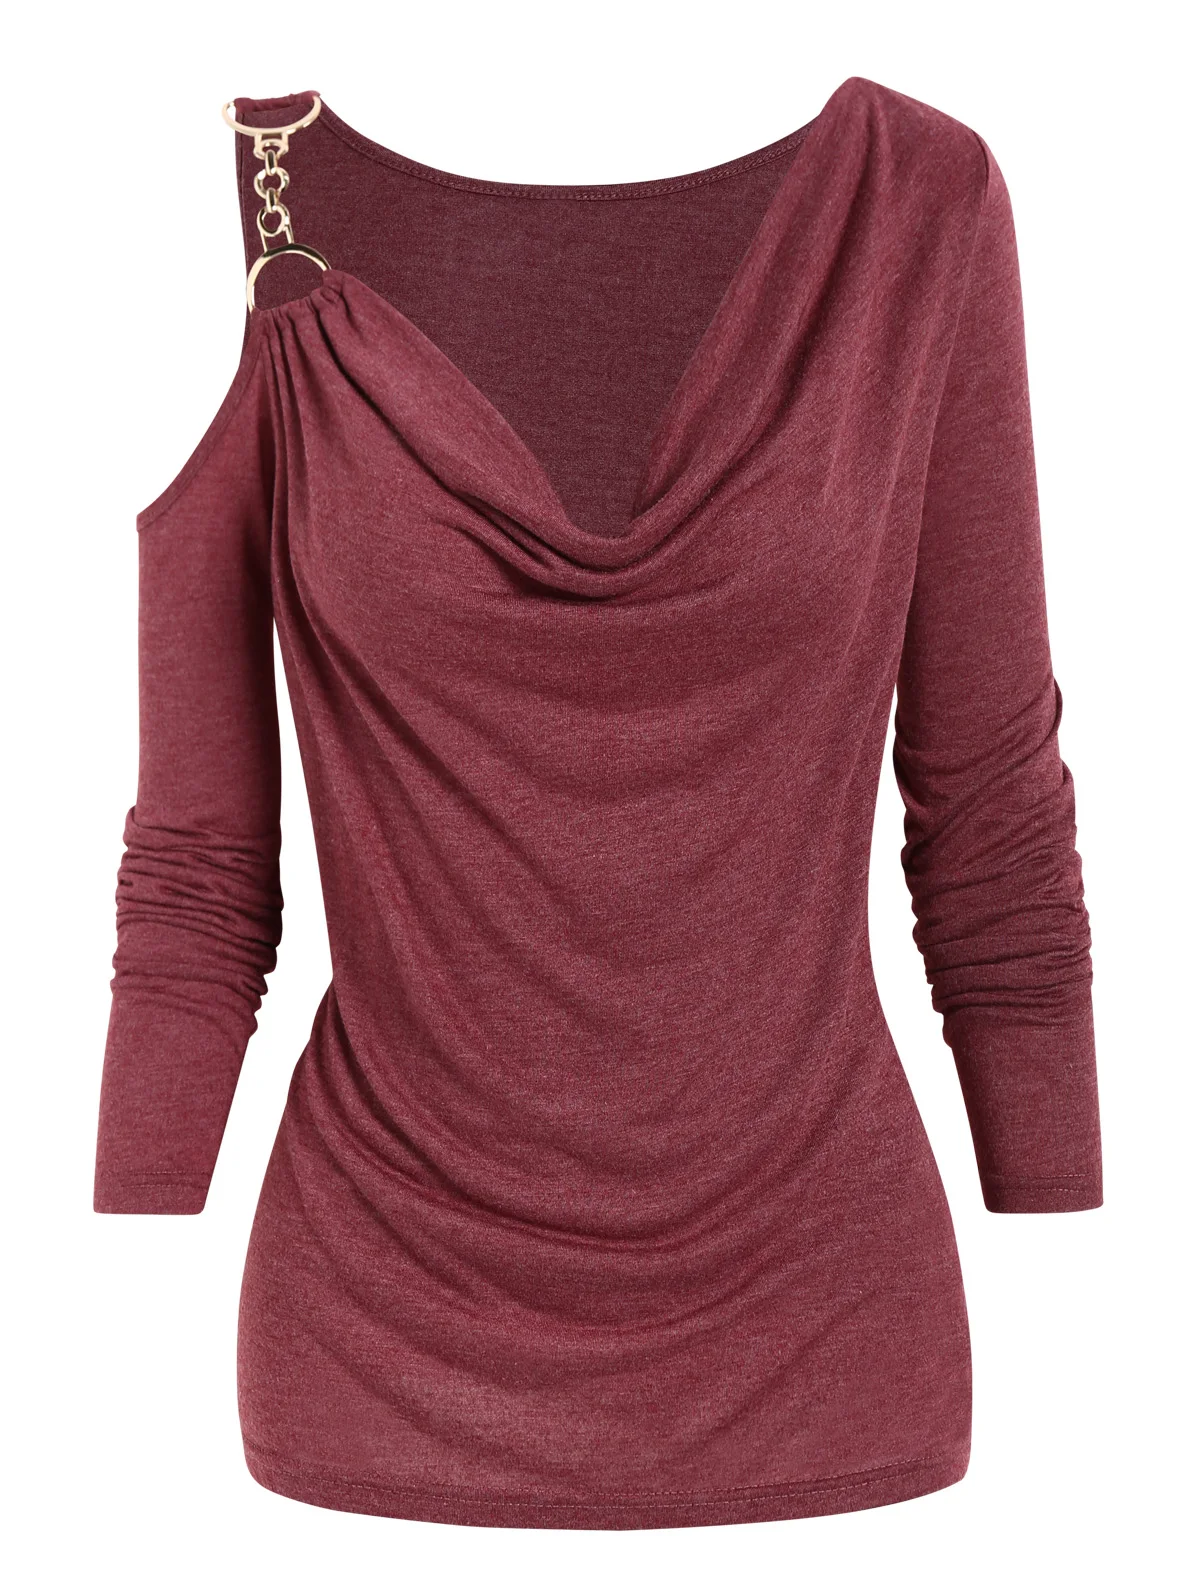 

Deep Red Fashion Women Long Sleeve Tops For Spring Fall Winter Cowl Neck Heather Cut Out Draped Casual Tee